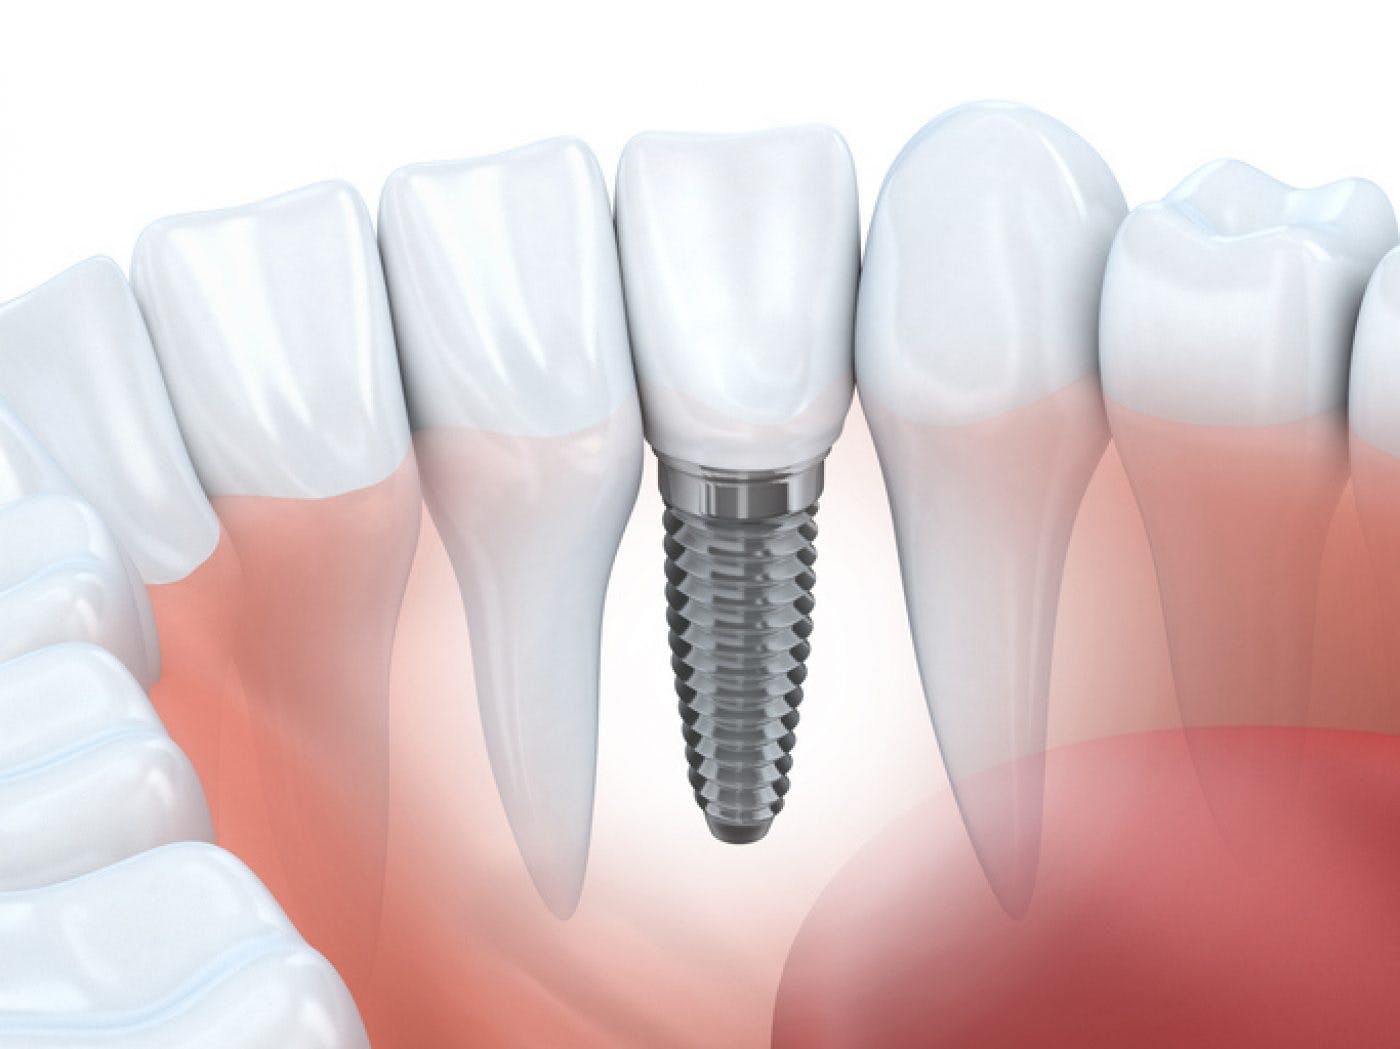 Single Implant in Mexico | Dental Image